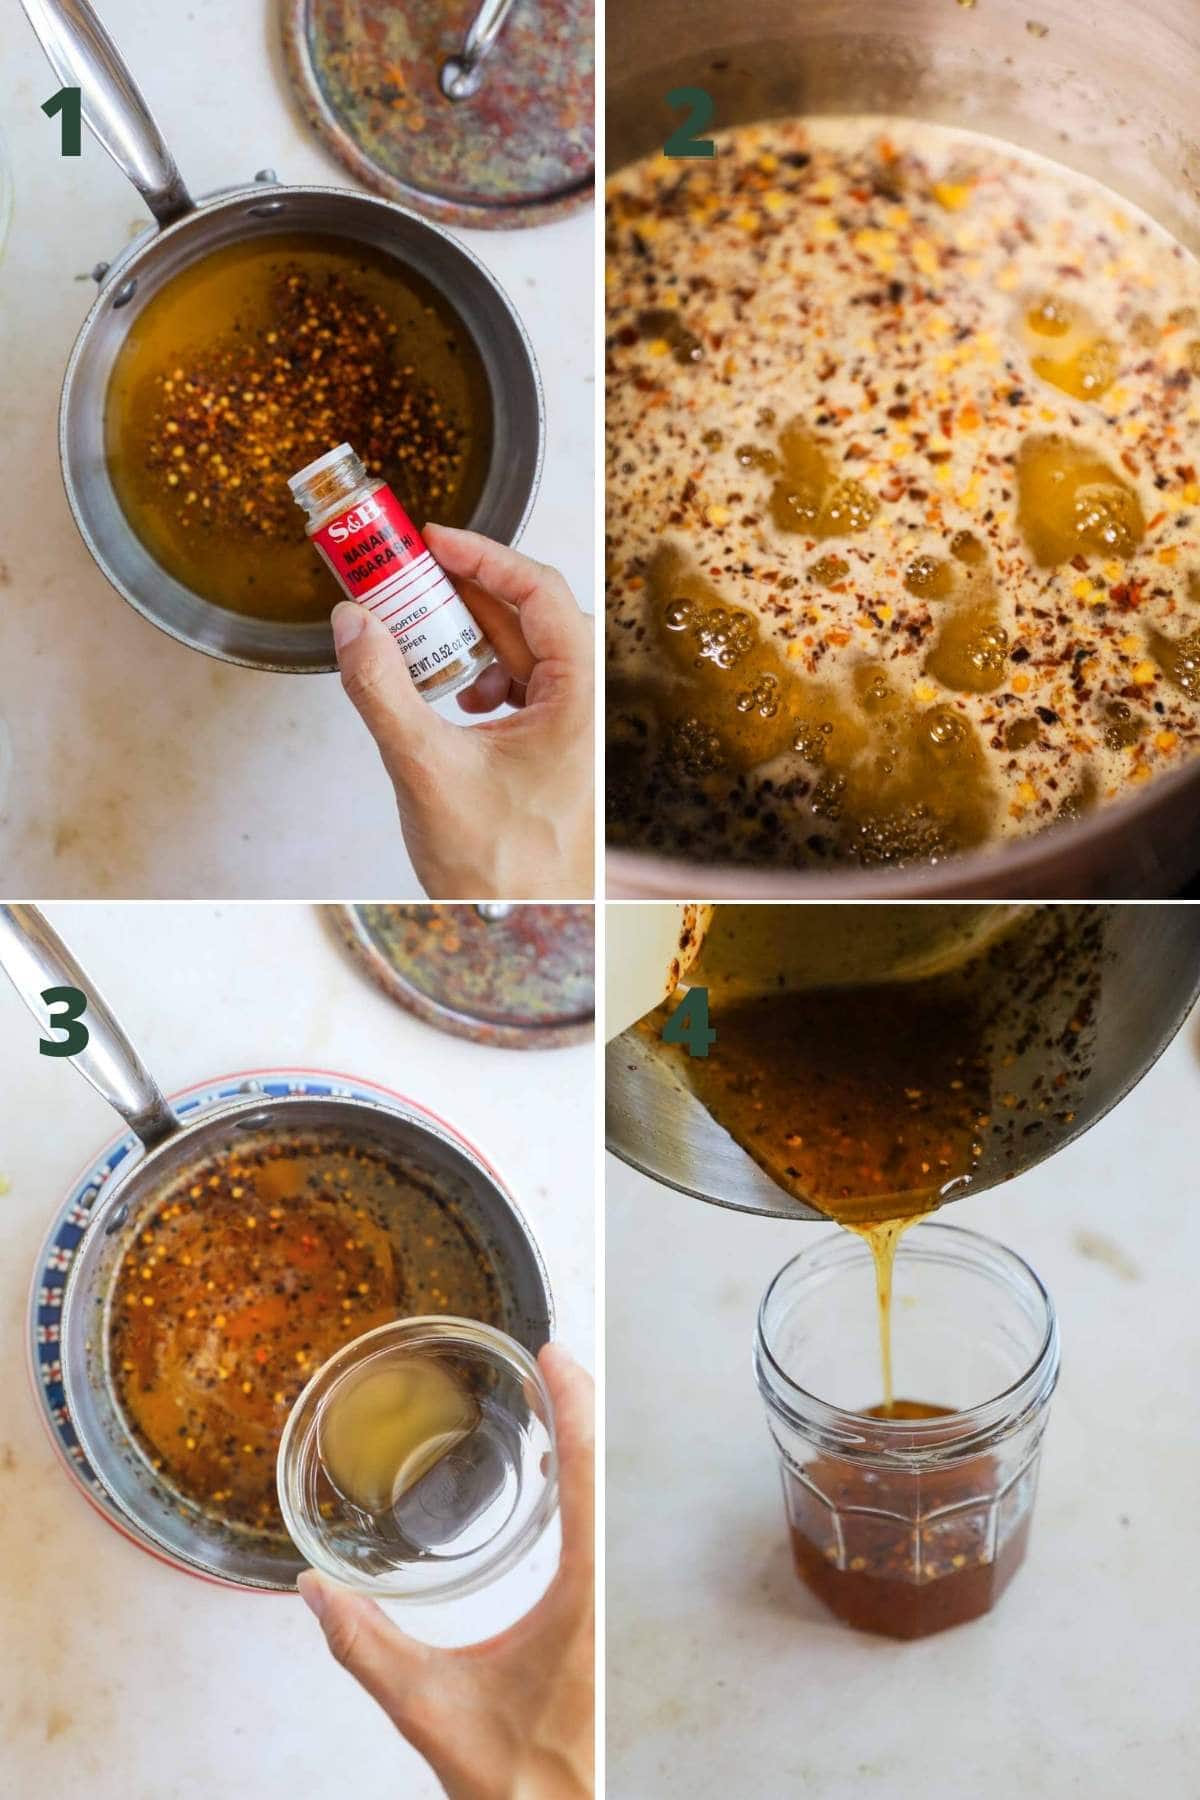 Step to make spicy hot honey sauce, including simmering the honey, stirring in apple cider vinegar, and pouring it into a sanitized jar.